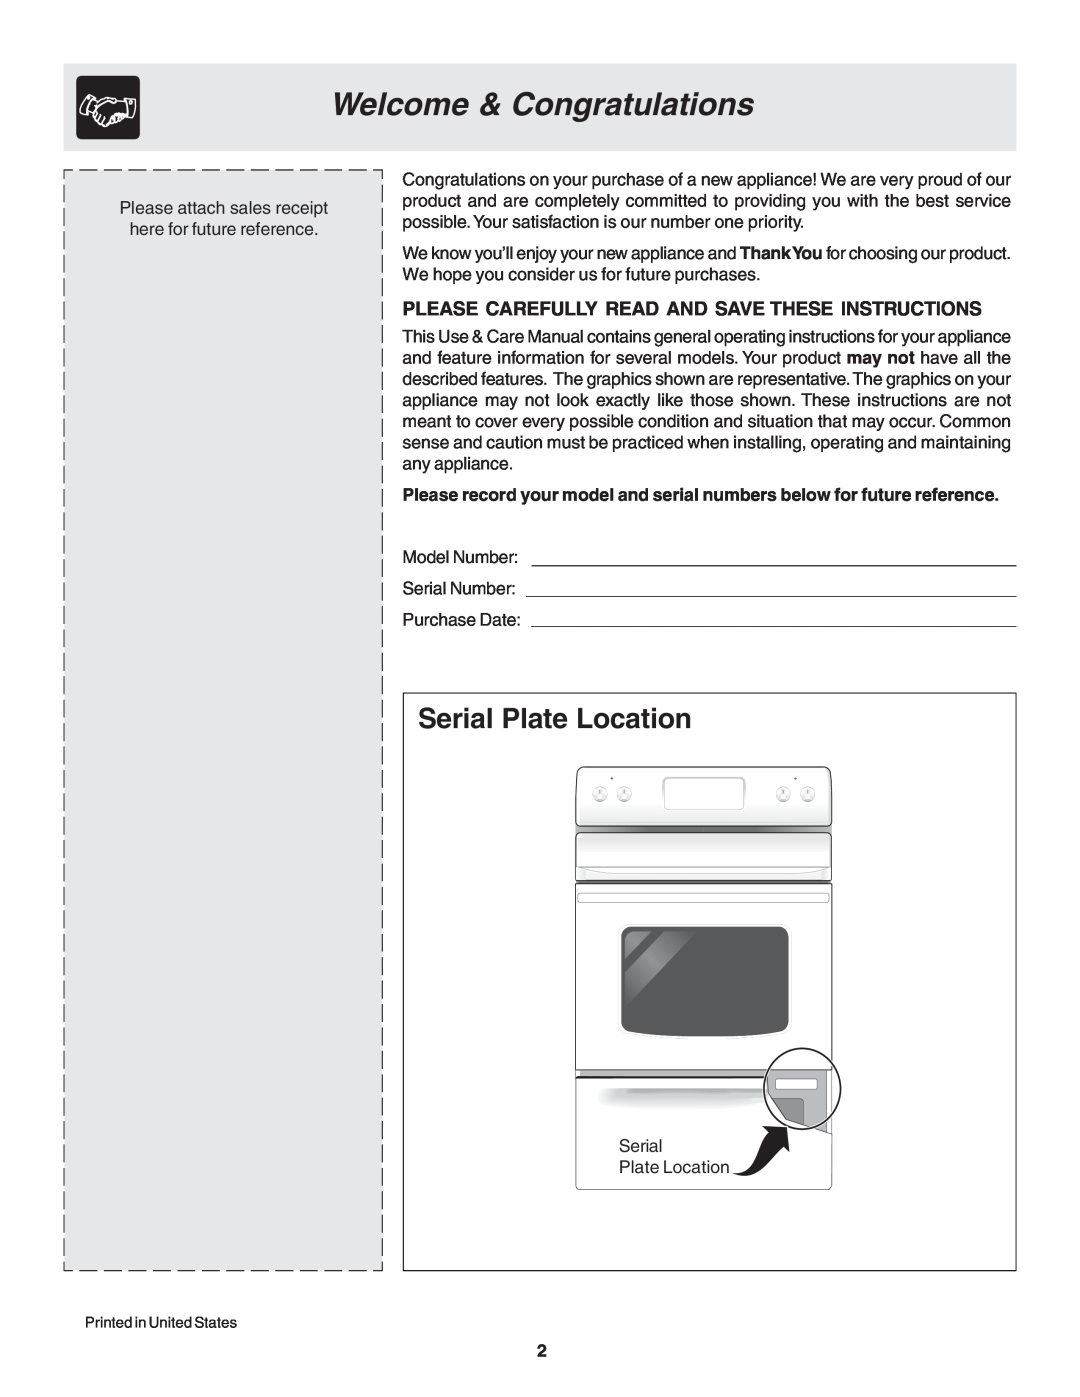 Frigidaire 318200439 Welcome & Congratulations, Serial Plate Location, Please Carefully Read And Save These Instructions 